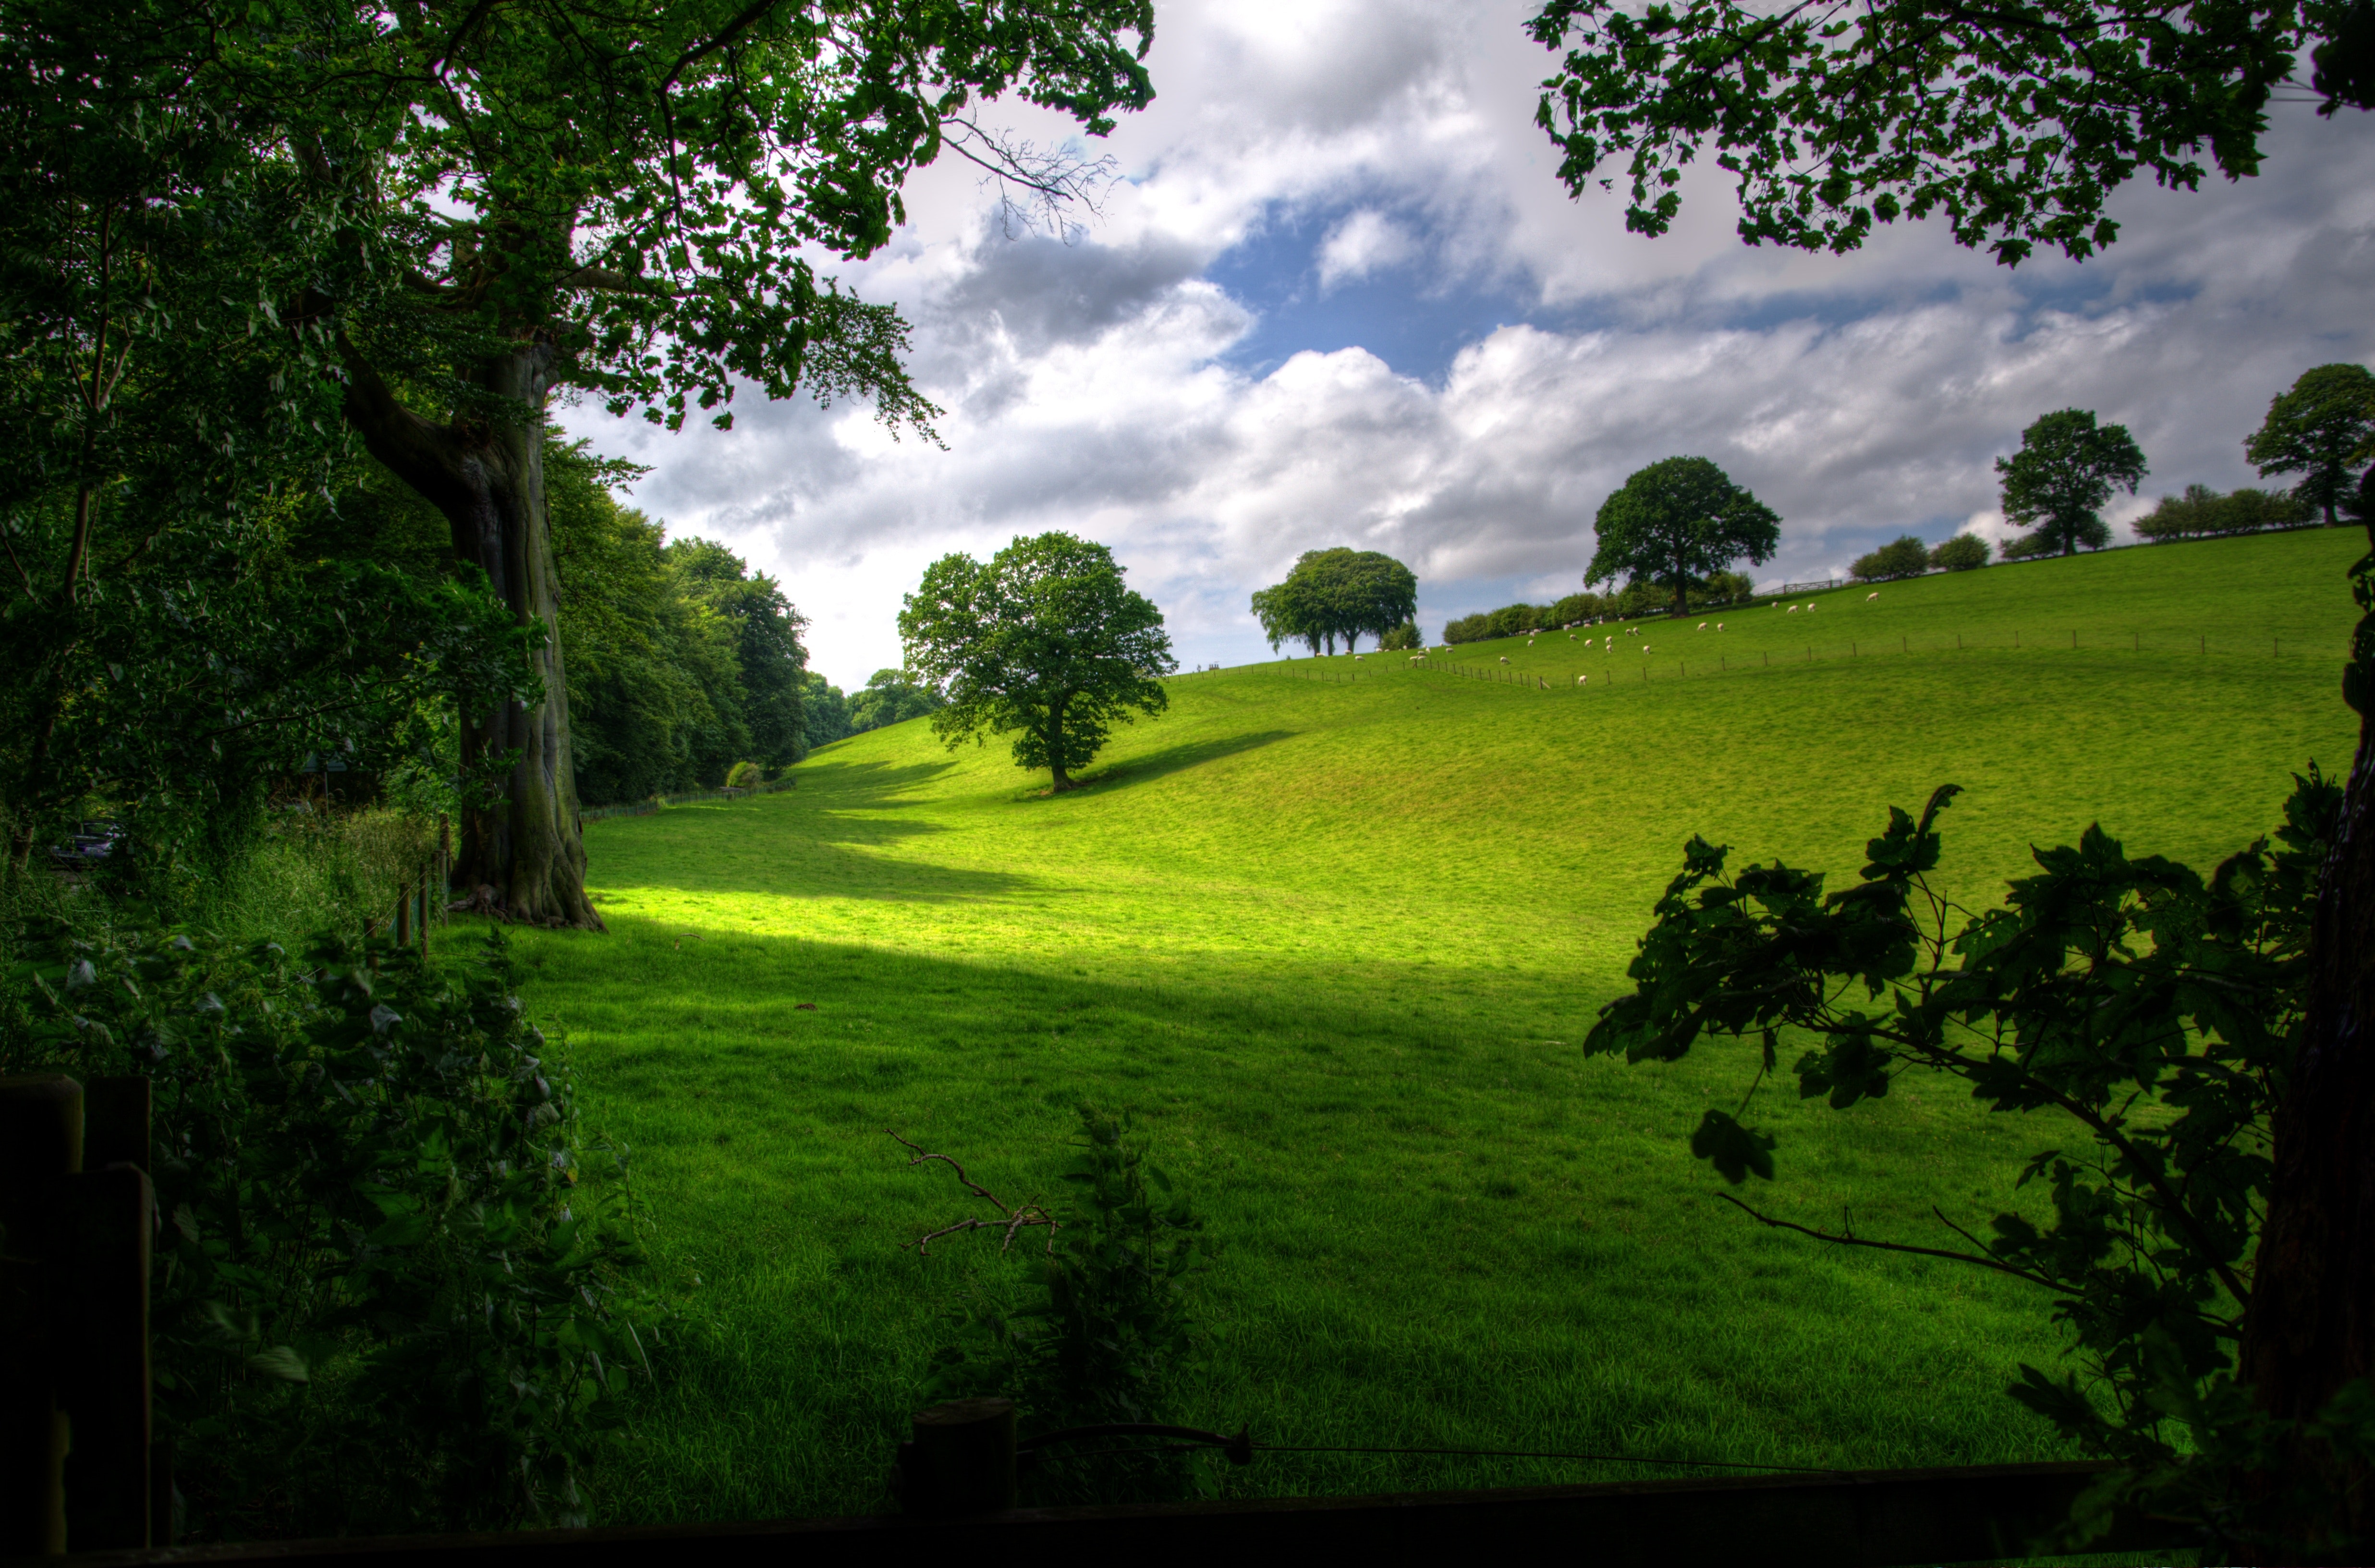 Green hill with tree under white clouds and blue sky during daytime photo